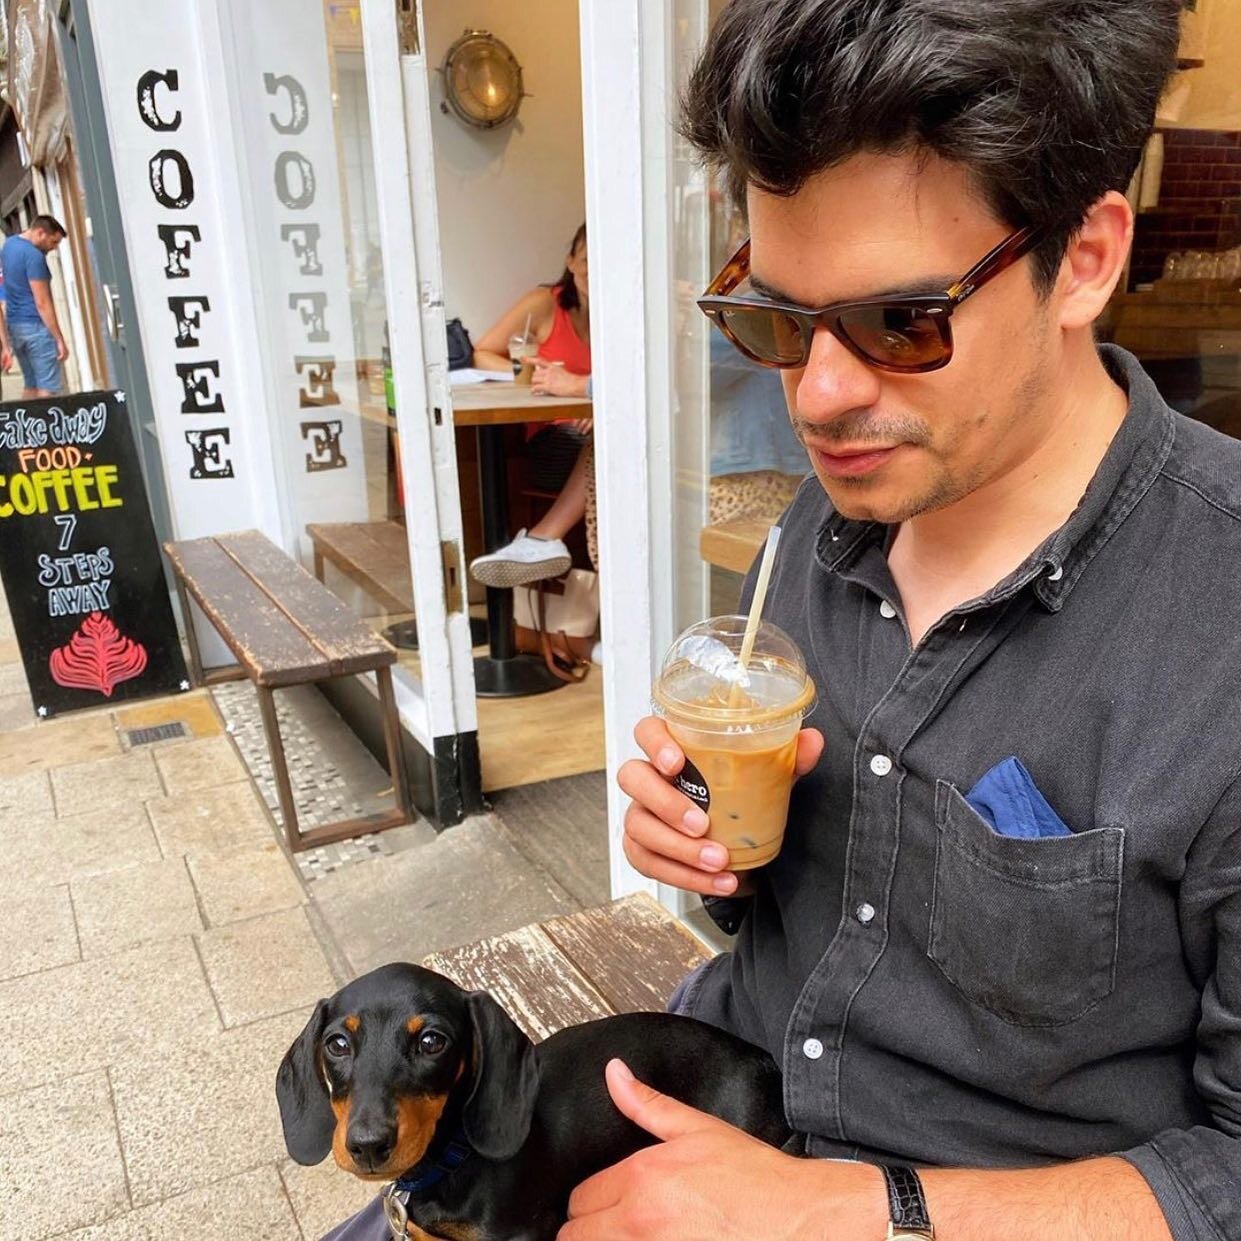 Another day, another iced coffee and dog walk! The pup needs socialising... So gone are the sumptuous parkland frolics, lakes and deer, and ushered in are the parched scrublands of the apocalypse where it seems all the cool kids hang out! Time to get